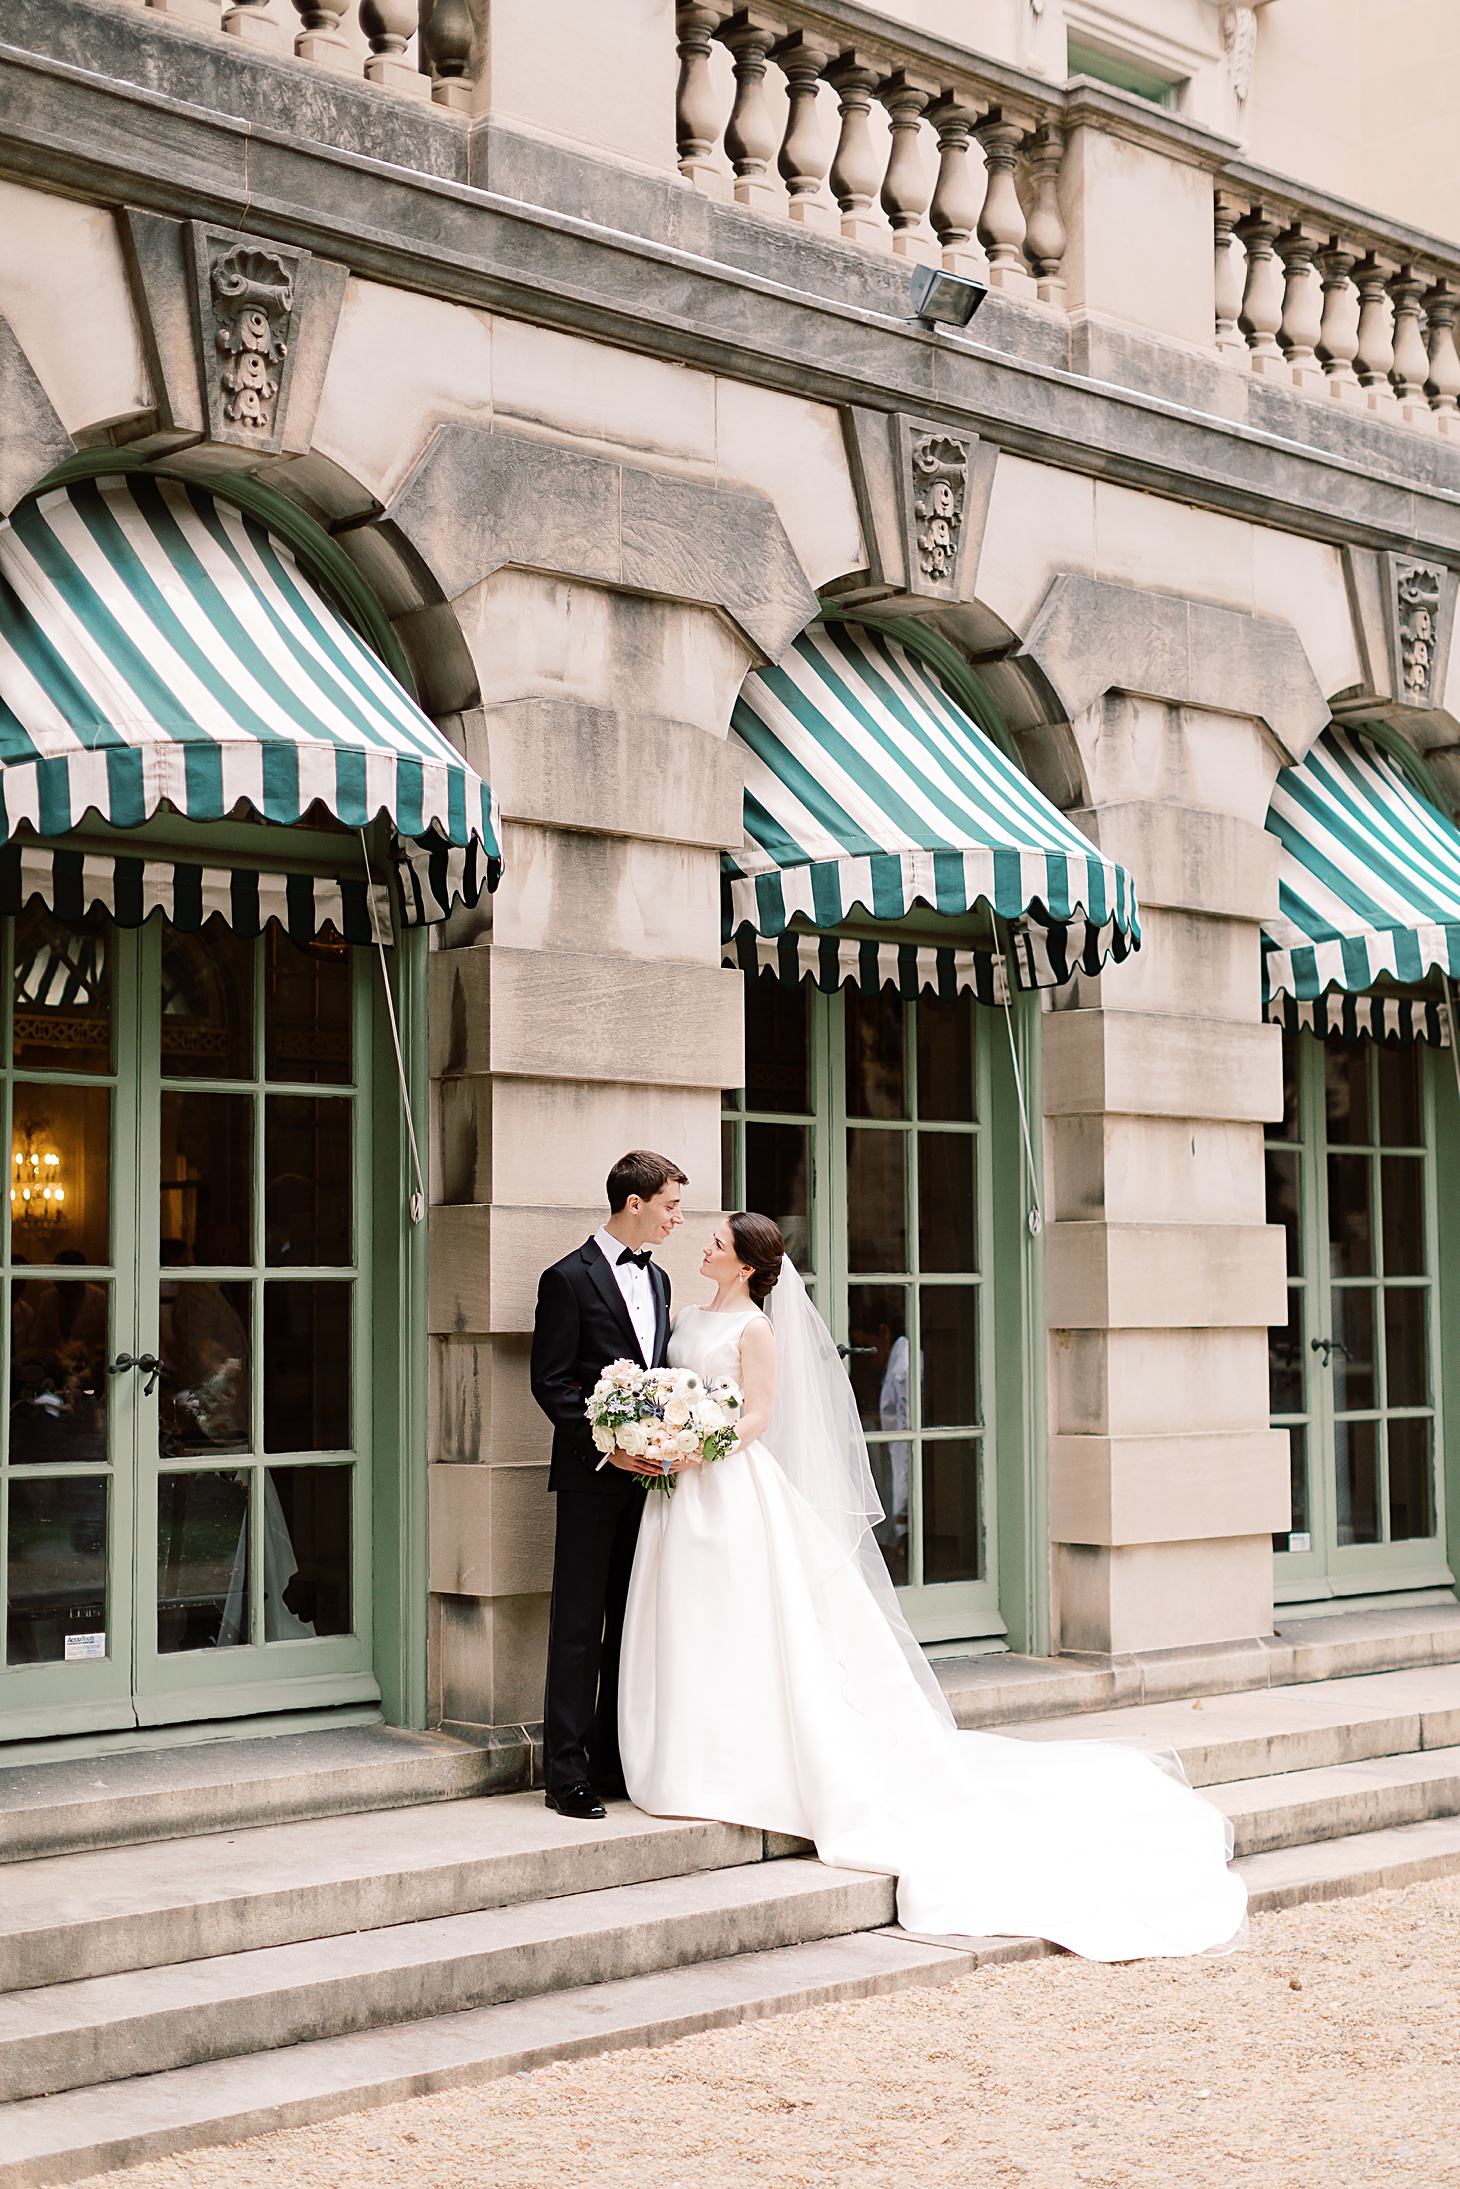 Green striped awning at Anderson House Wedding by Sarah Bradshaw